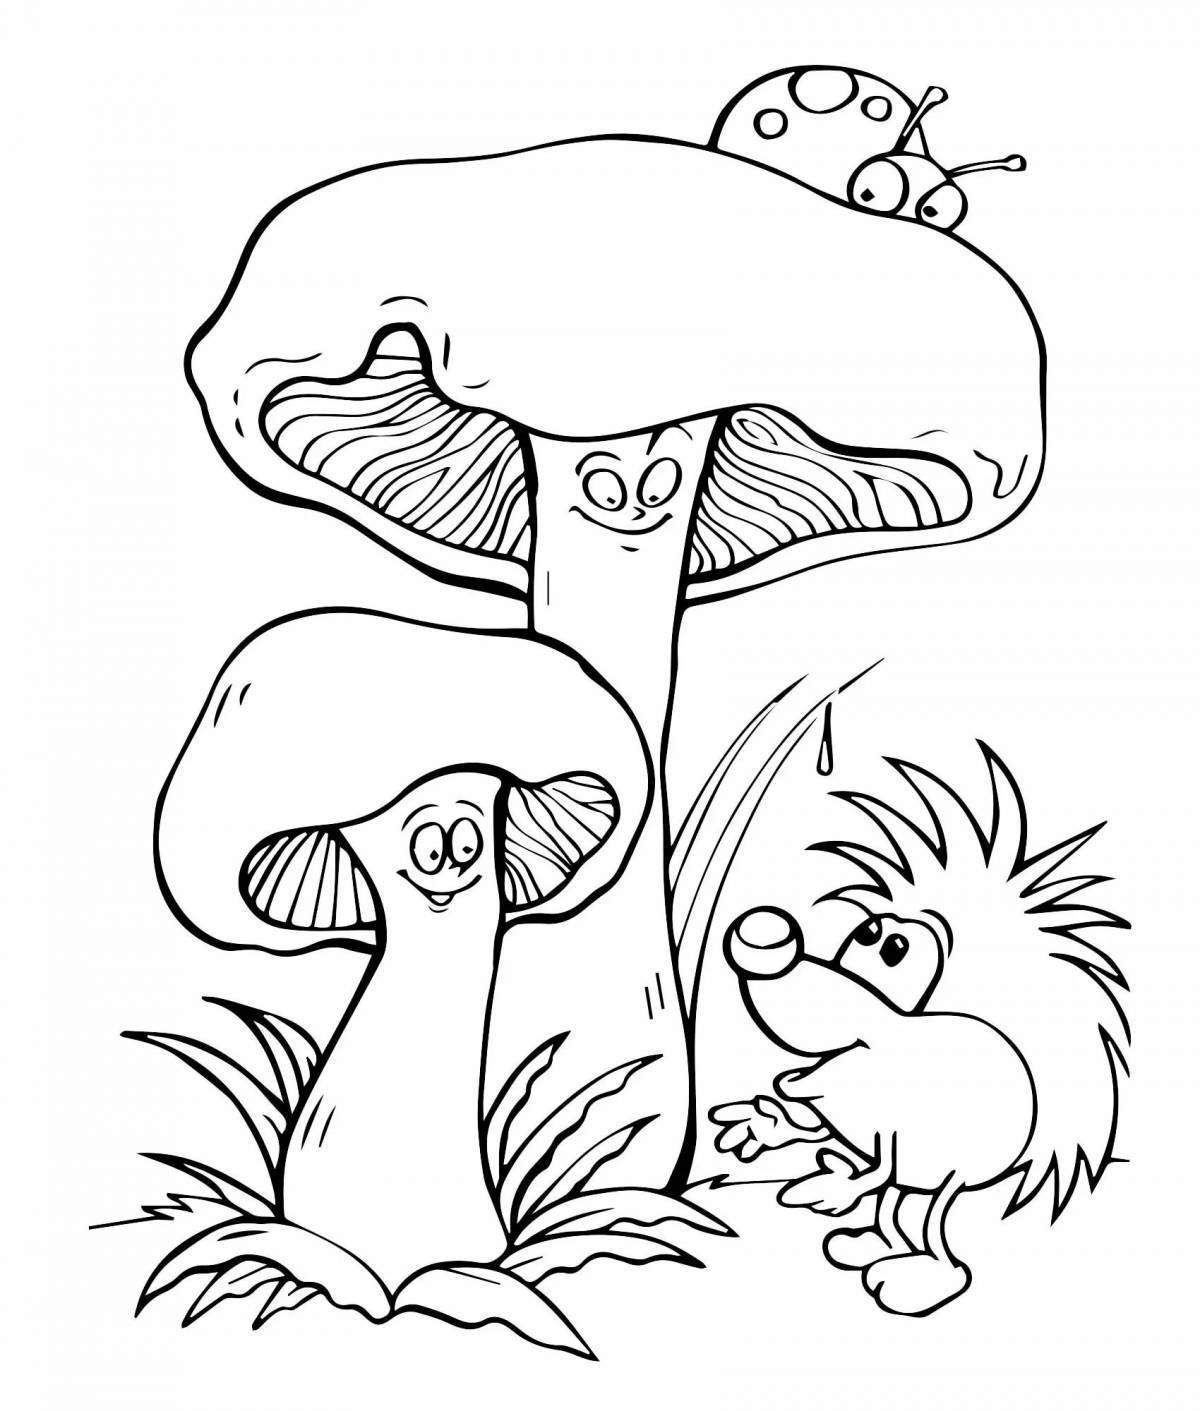 Great mushroom coloring book for 4-5 year olds